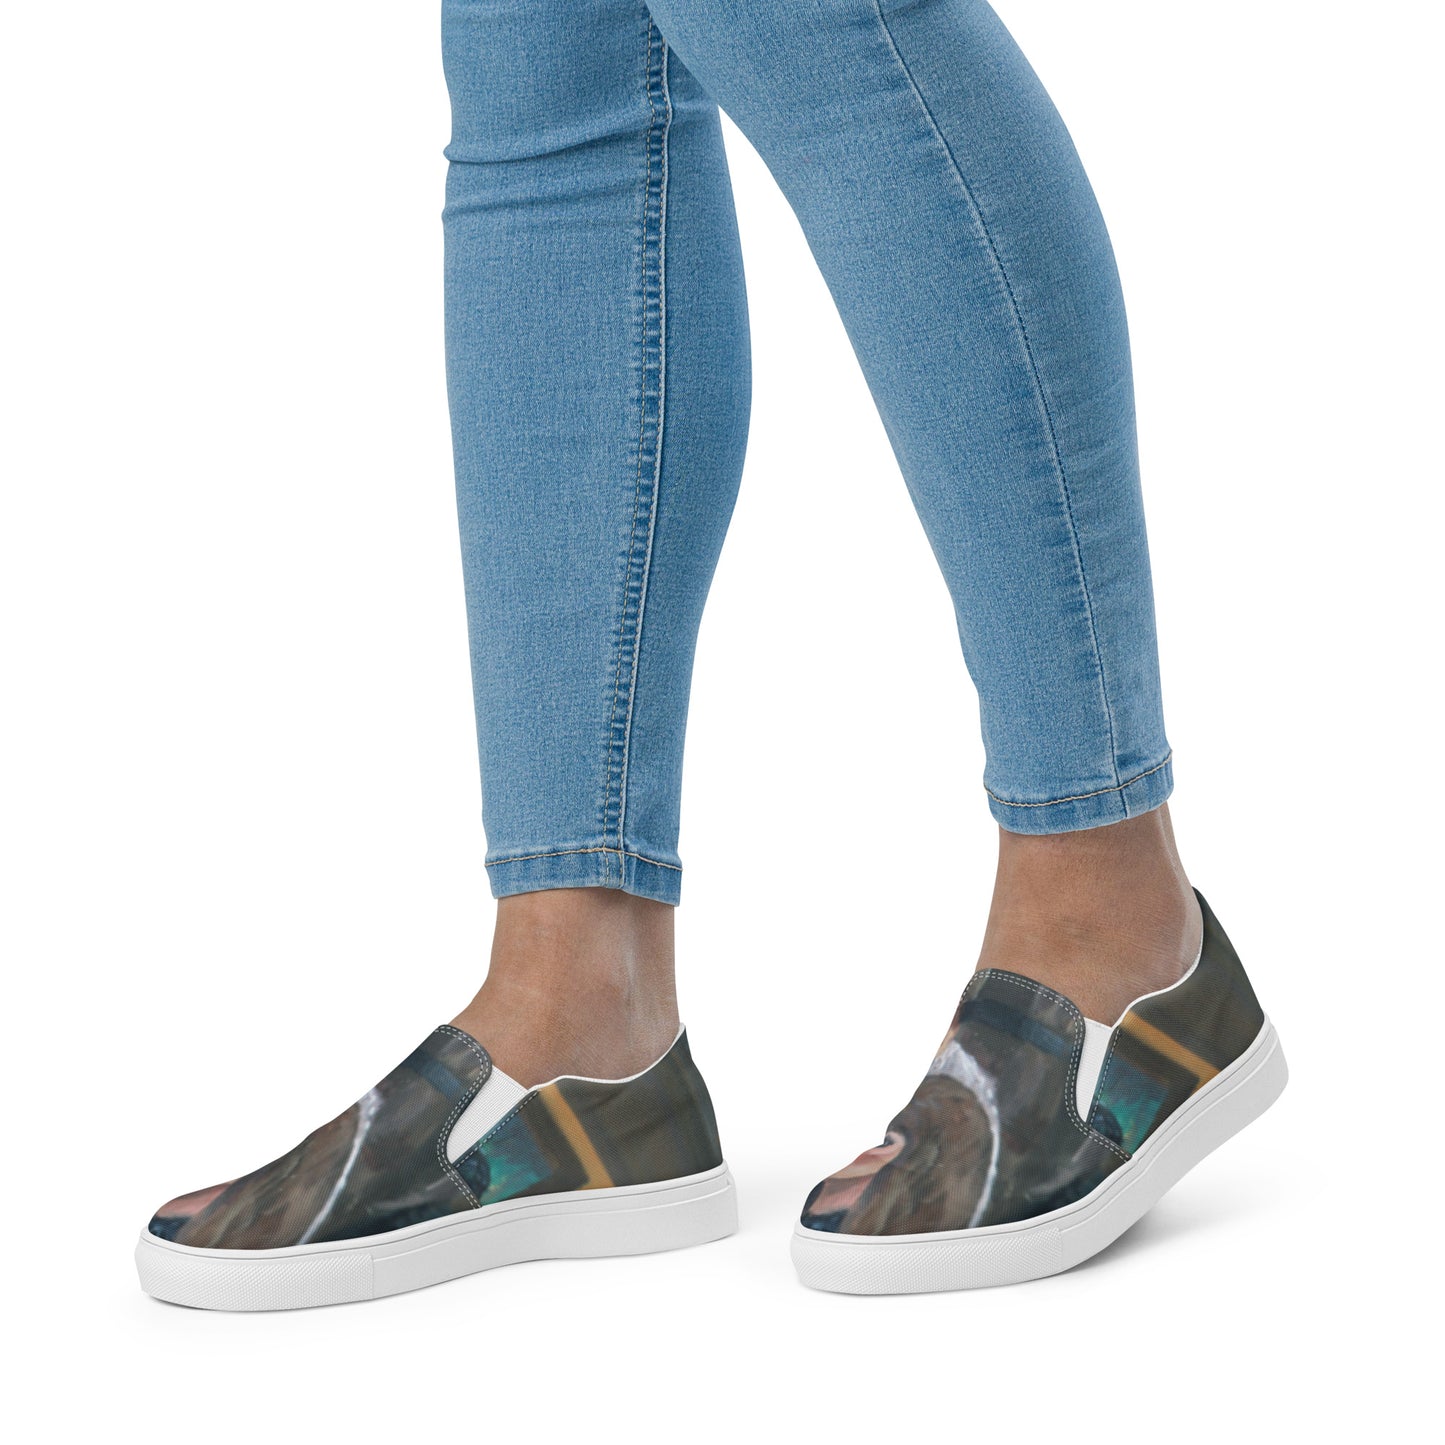 Friday Night - Women’s slip-on canvas shoes